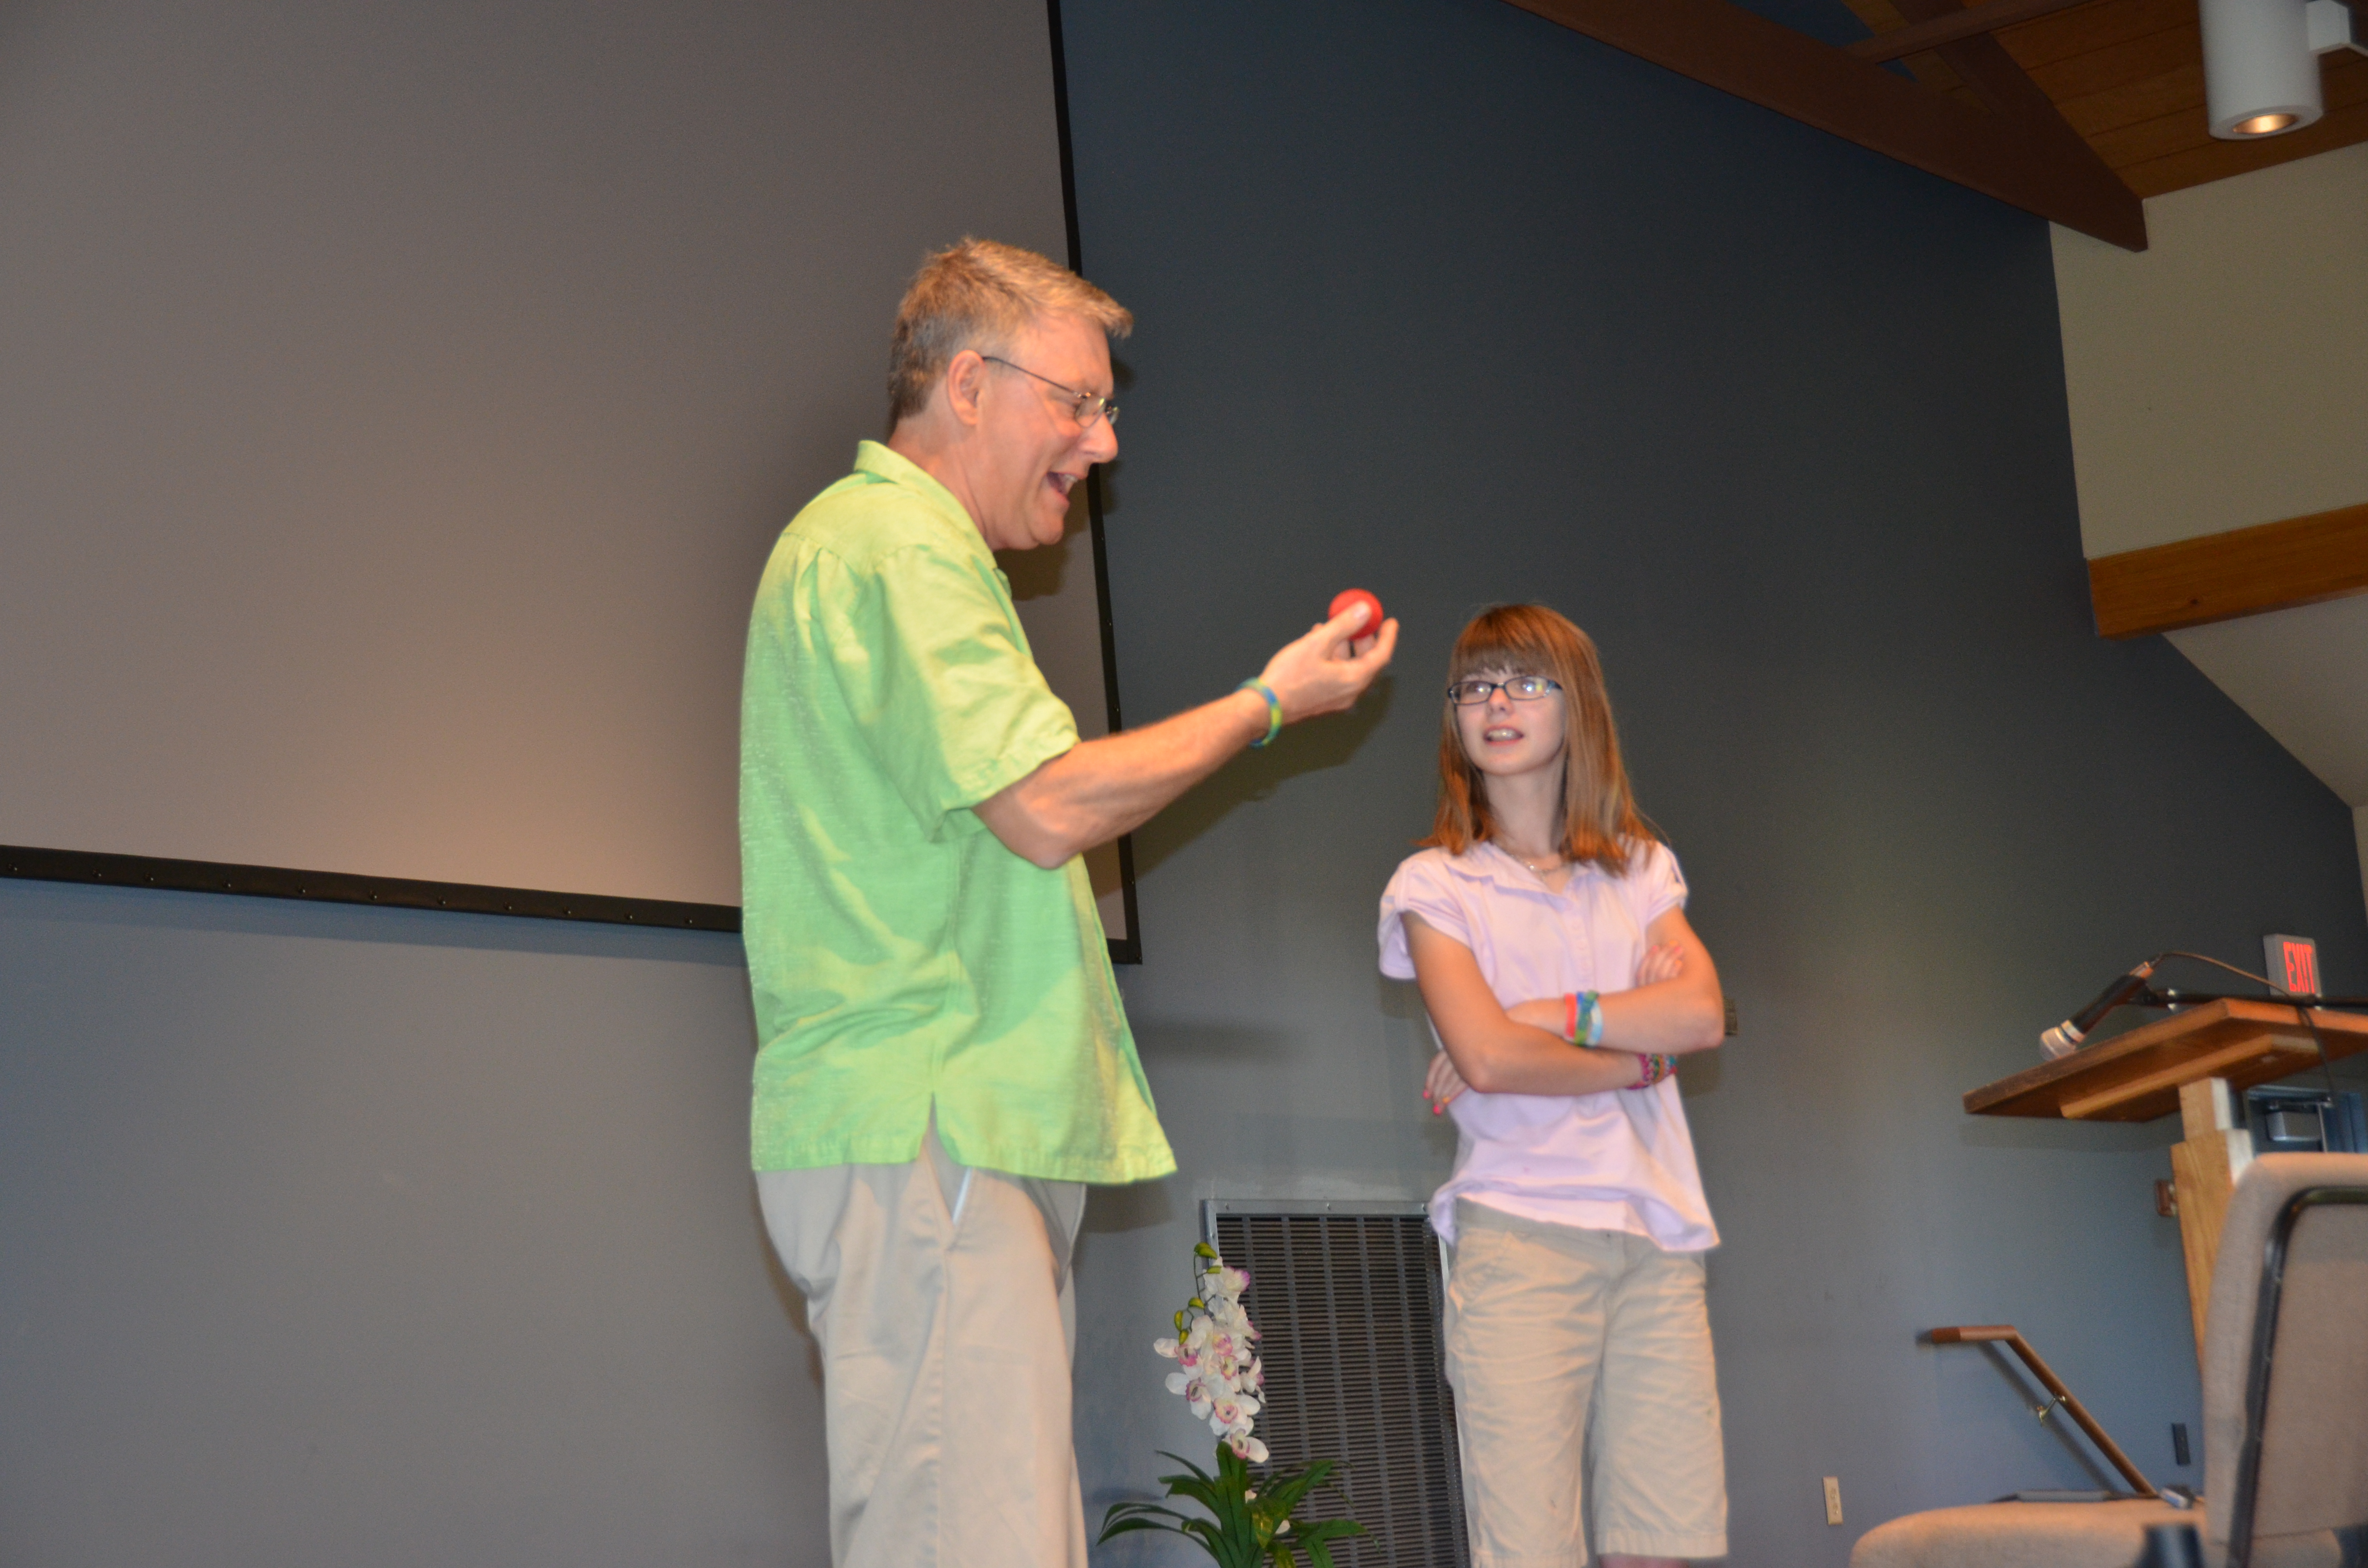 Tampa Bay area children’s magician for hire Timothy Pitch holding a red ball